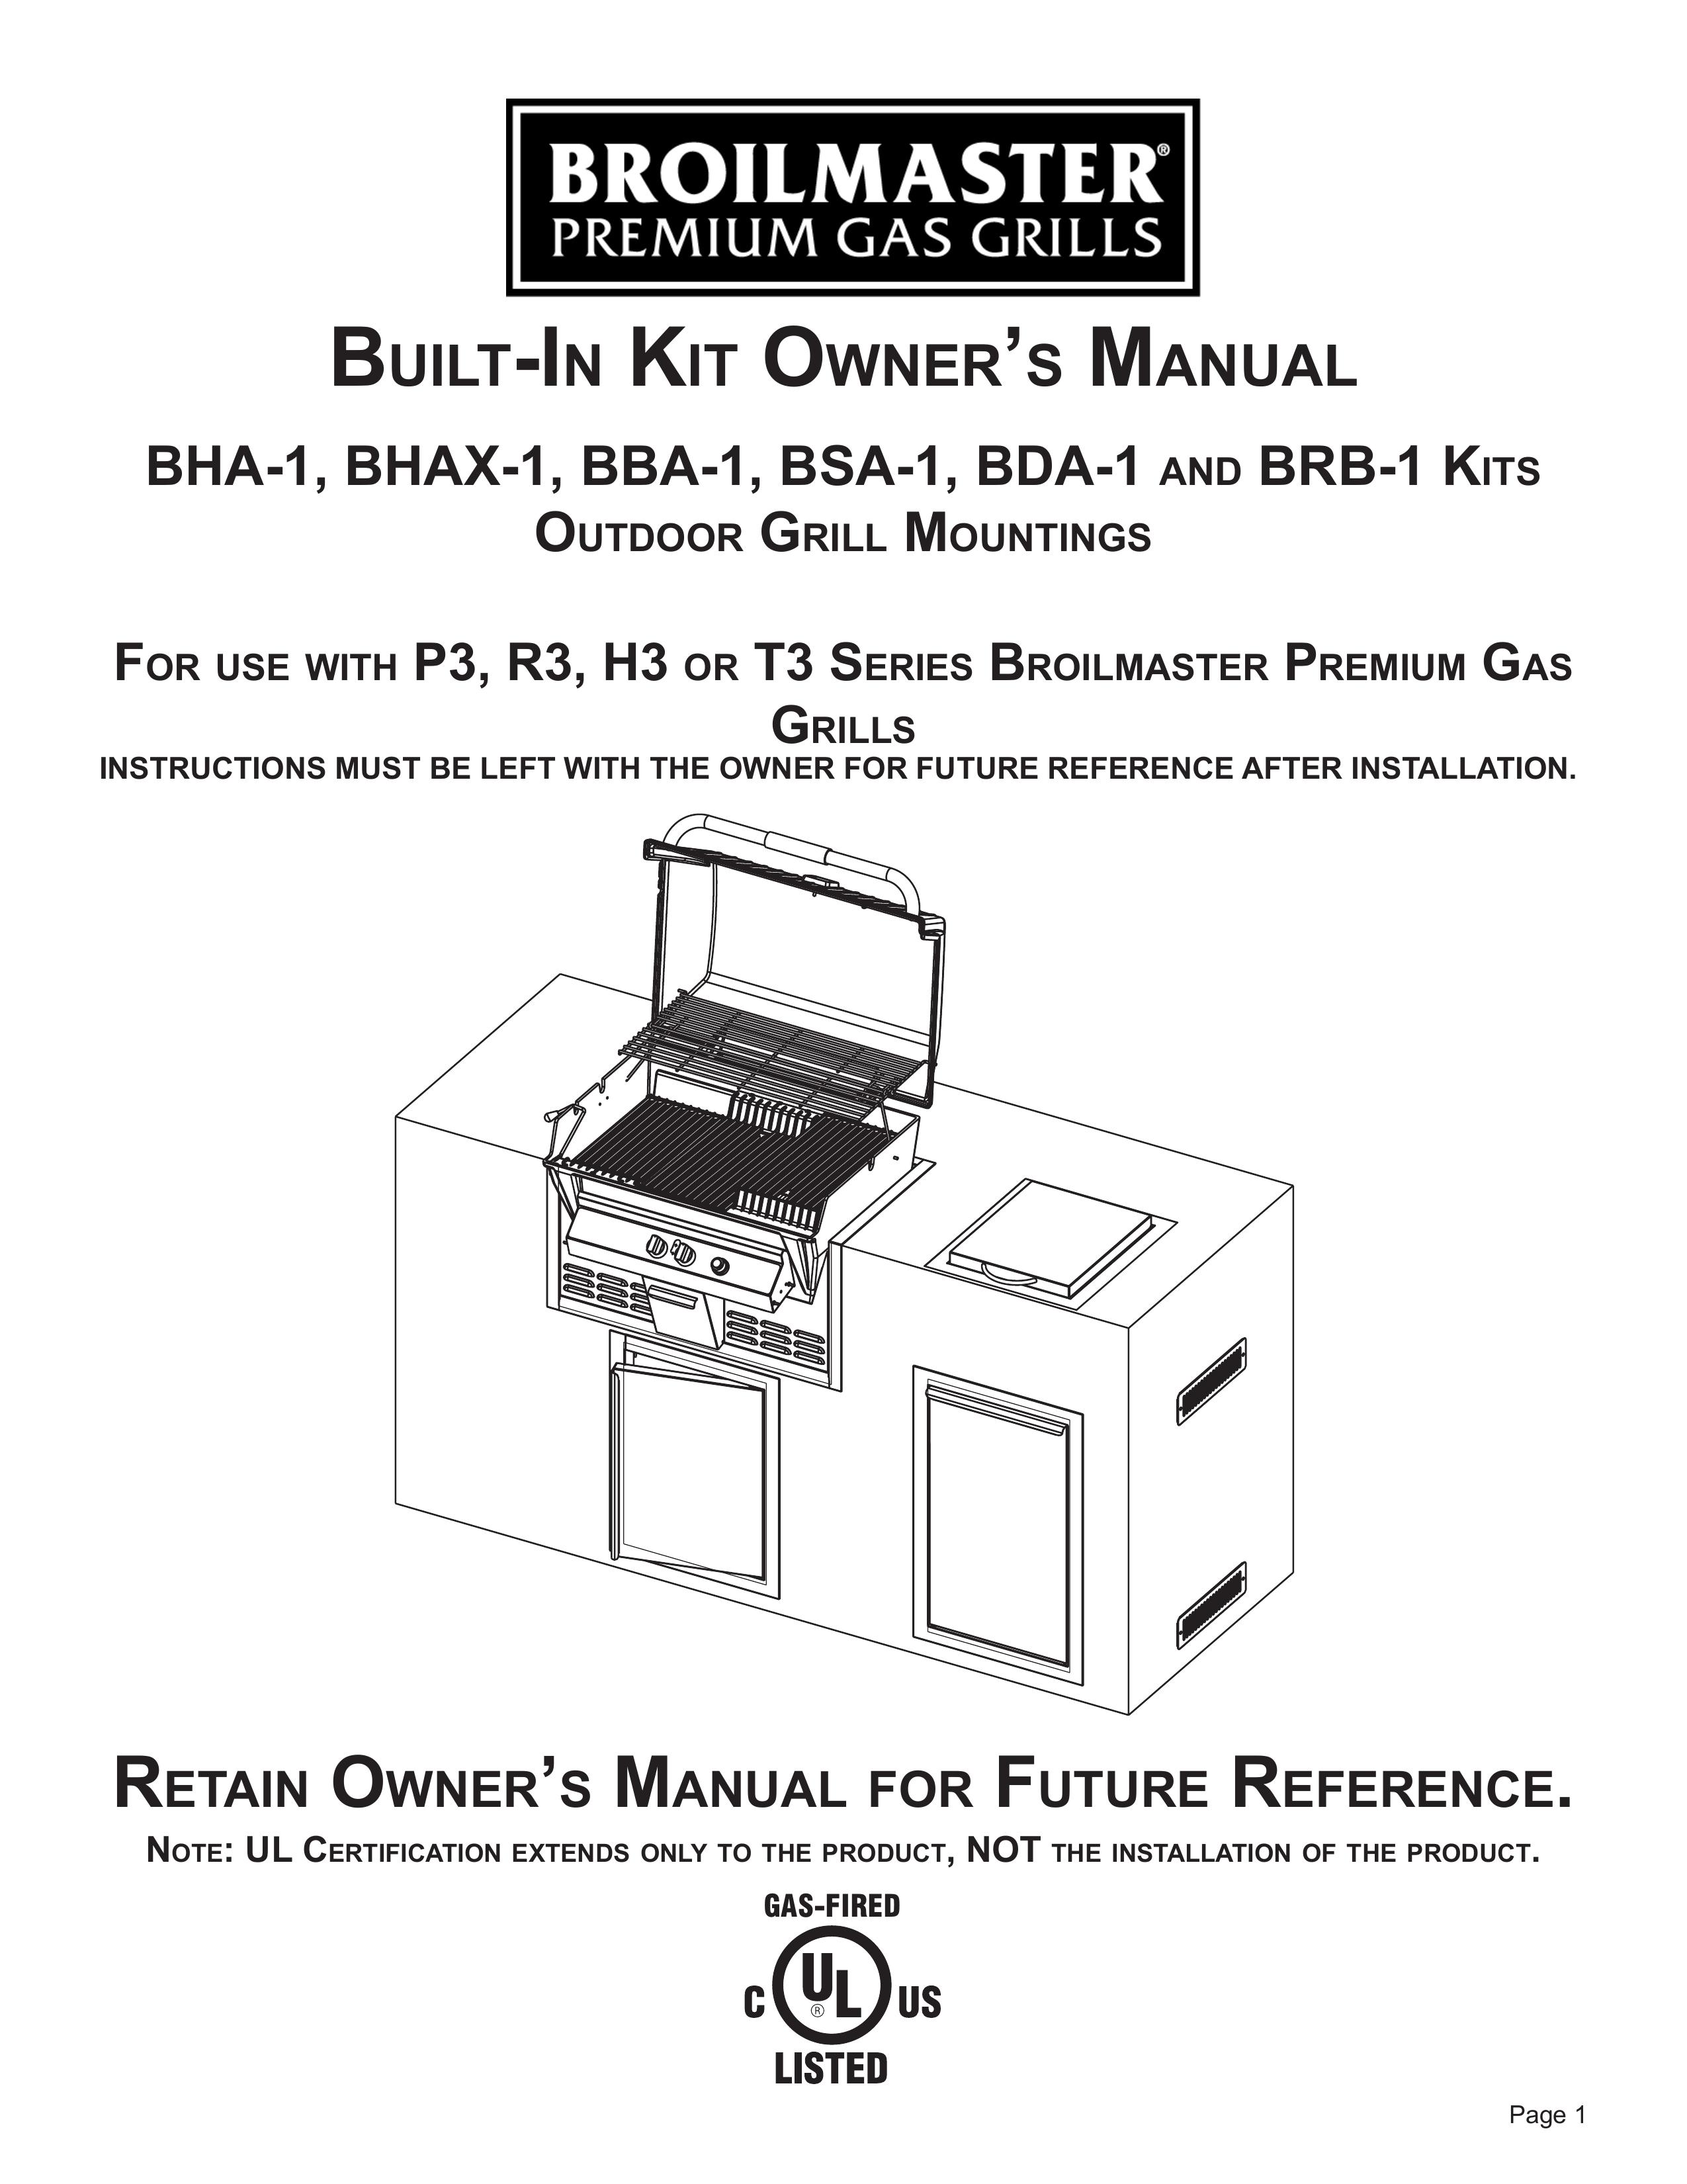 Broilmaster BHA-1 Gas Grill User Manual